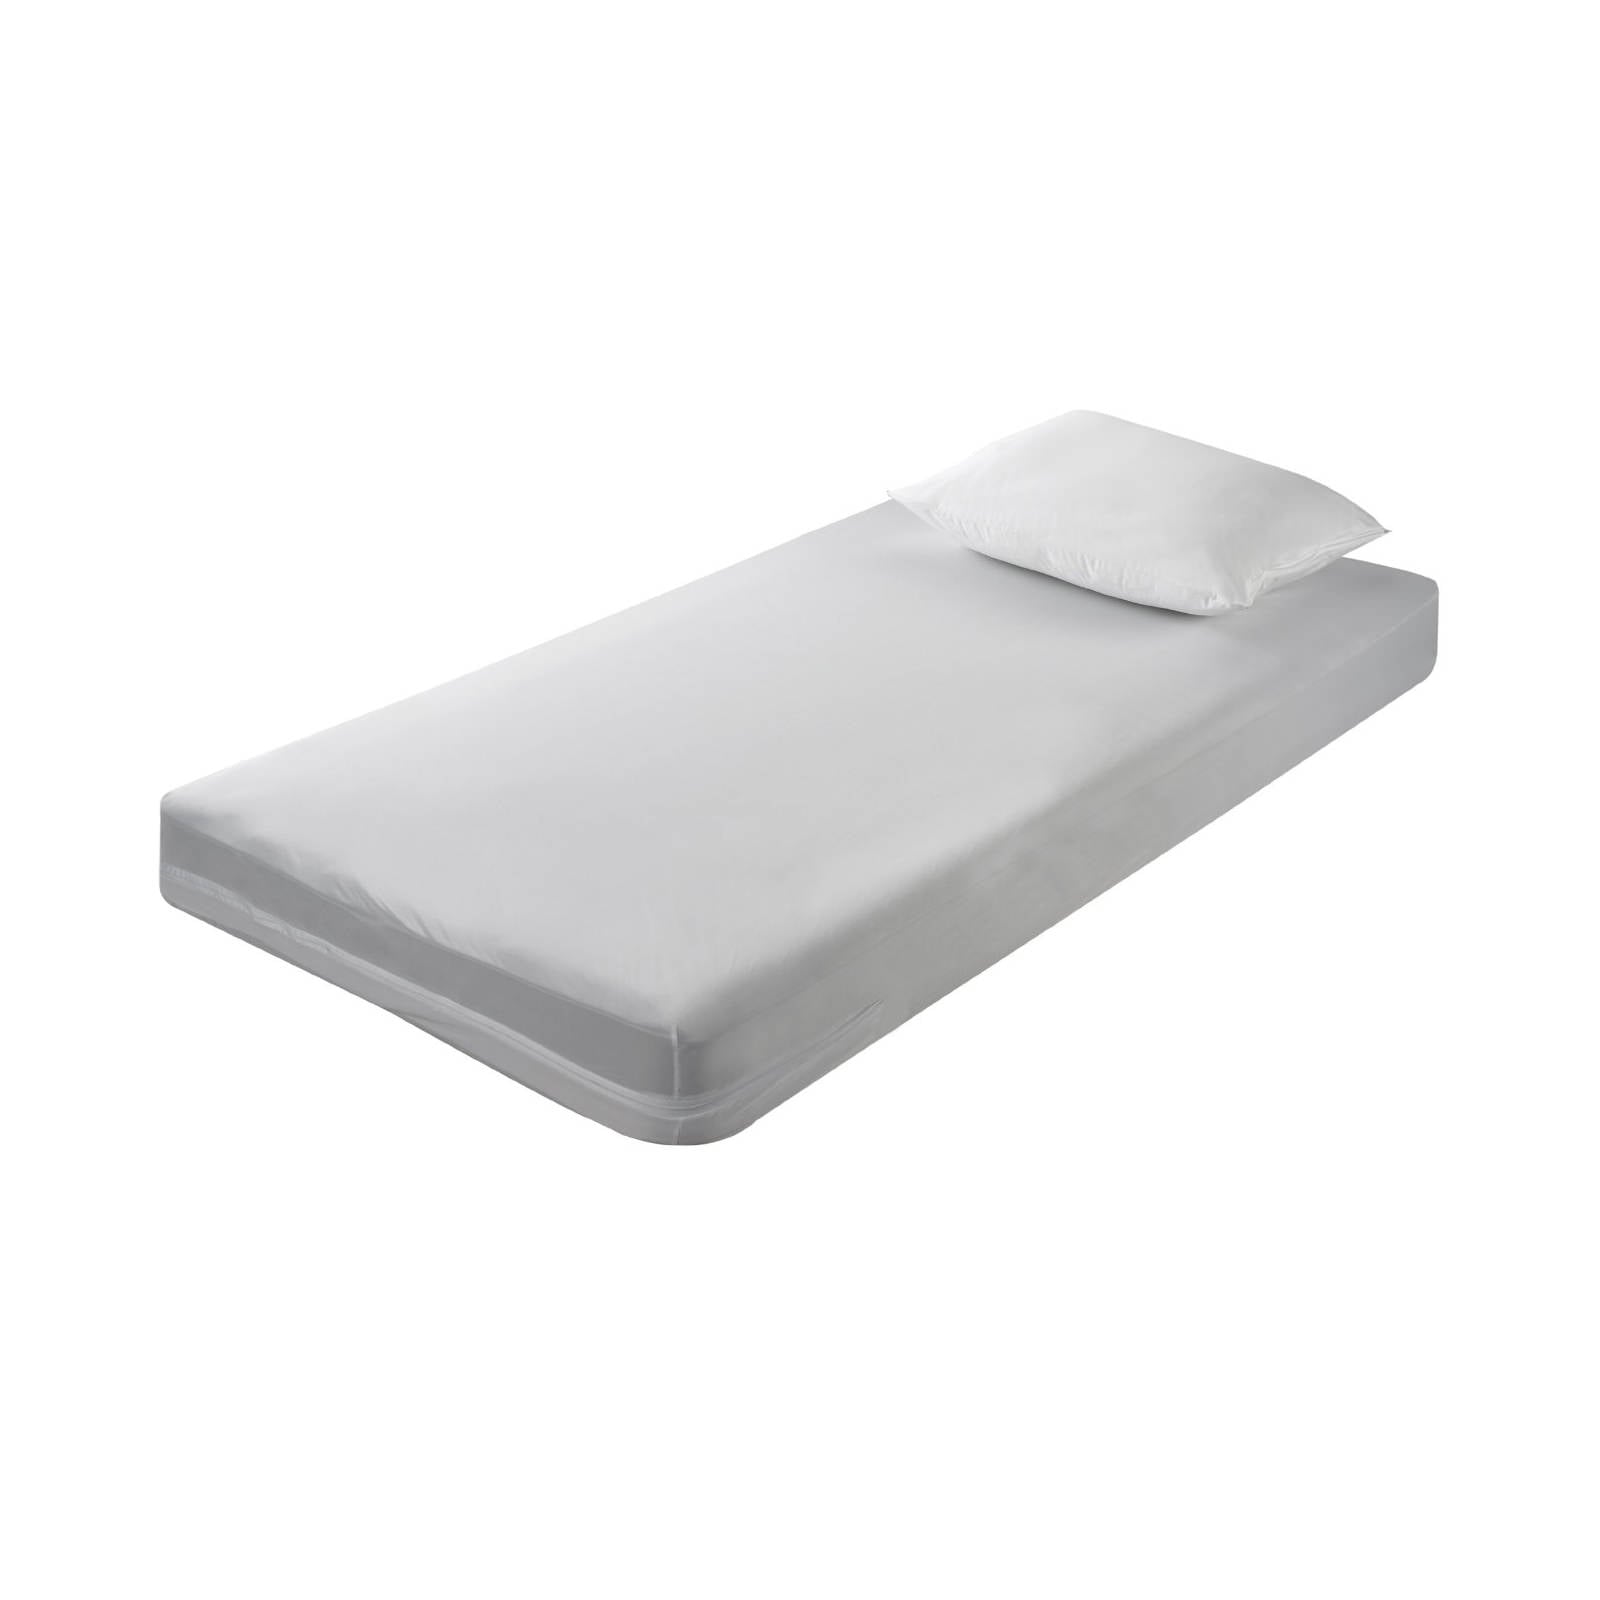 Hastings Home Twin XL Zippered Waterproof Mattress Protector